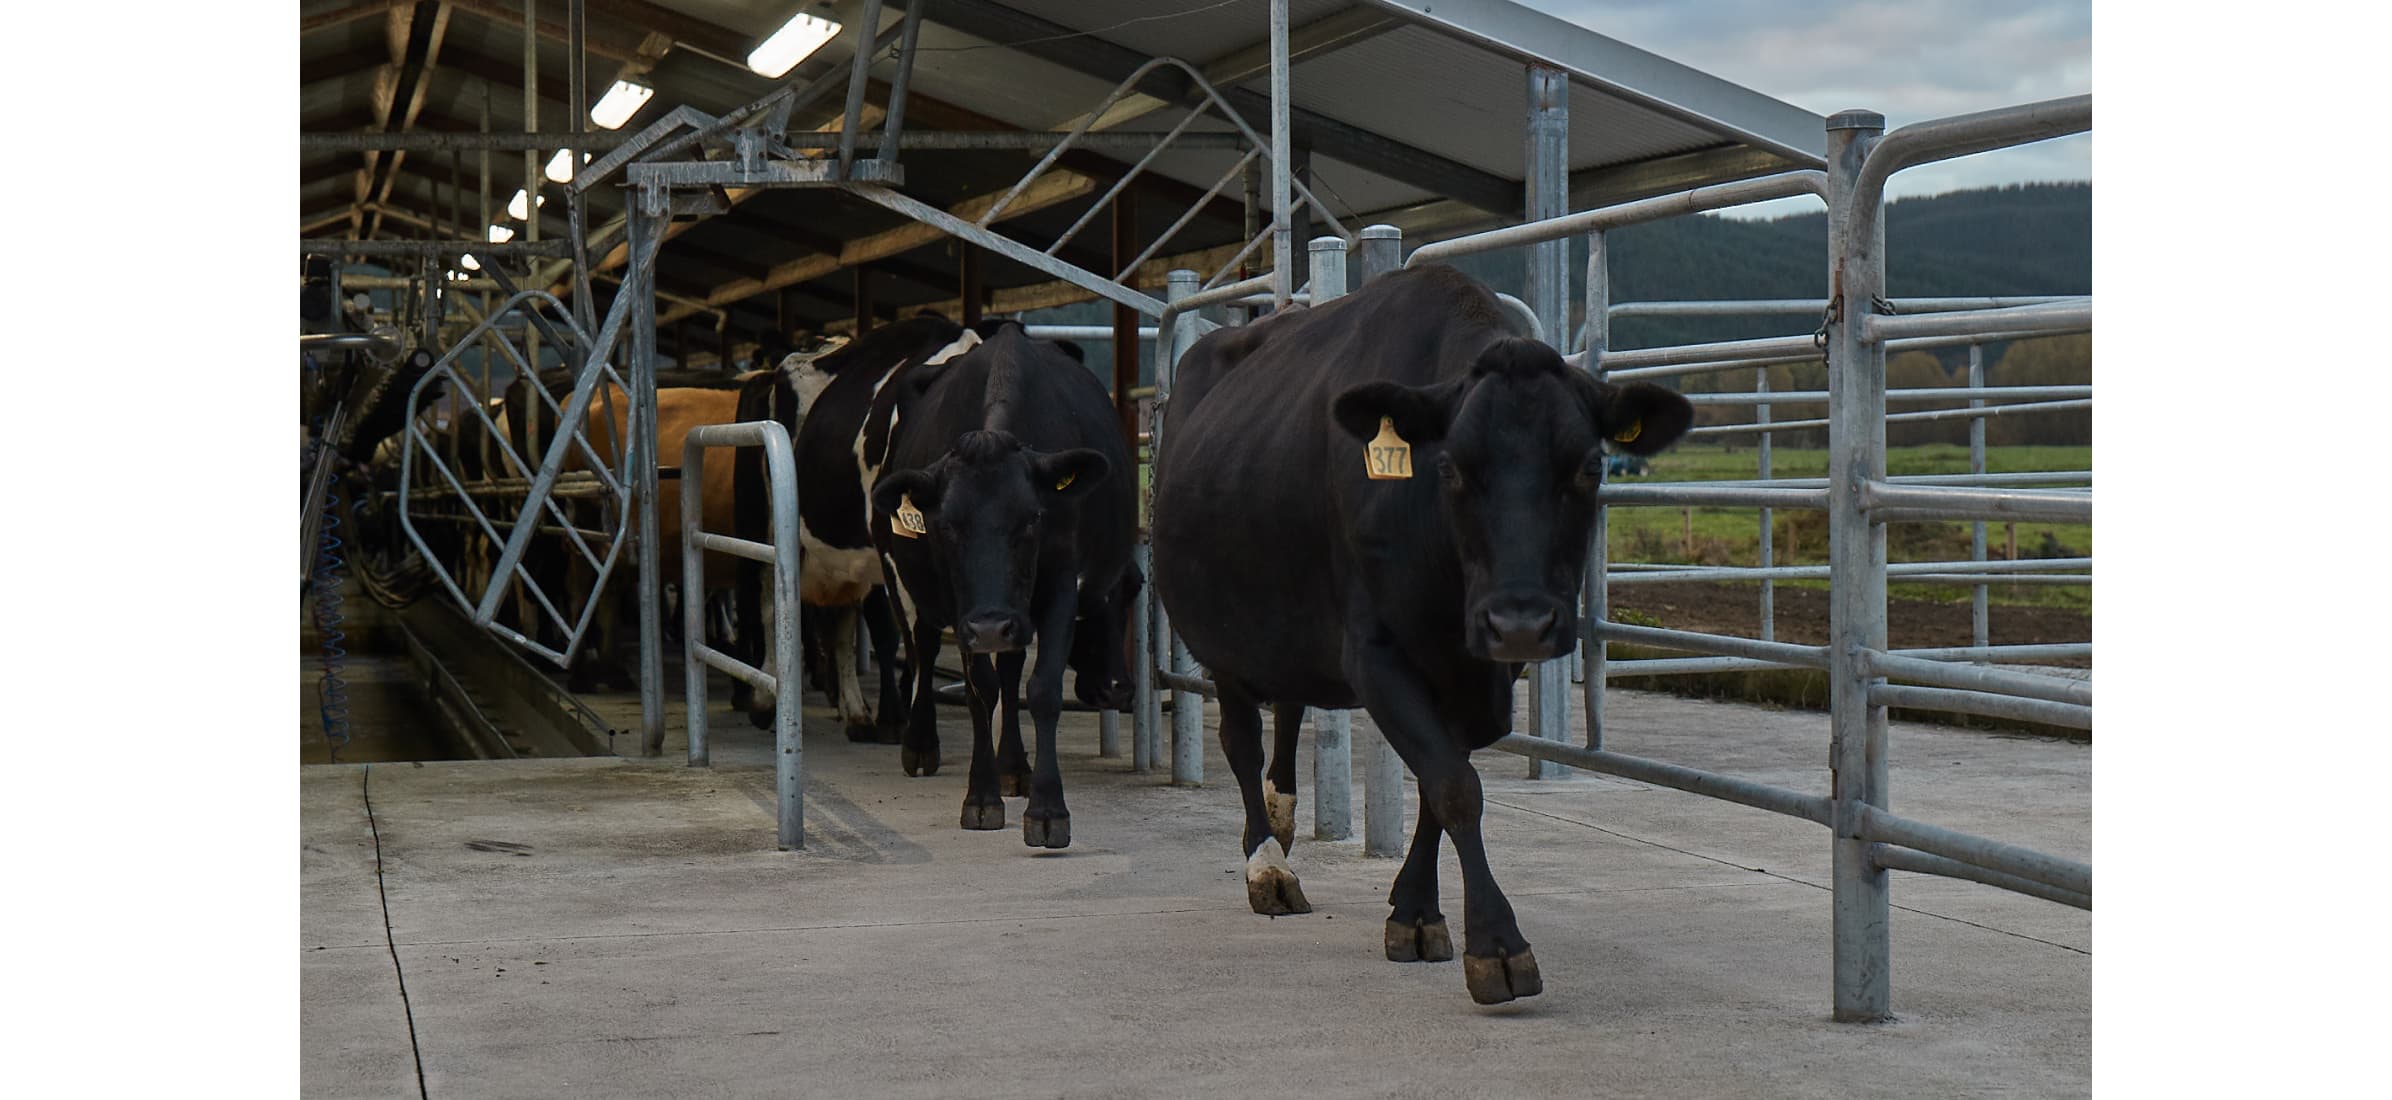 Cows move out of a milking shed after being milked.